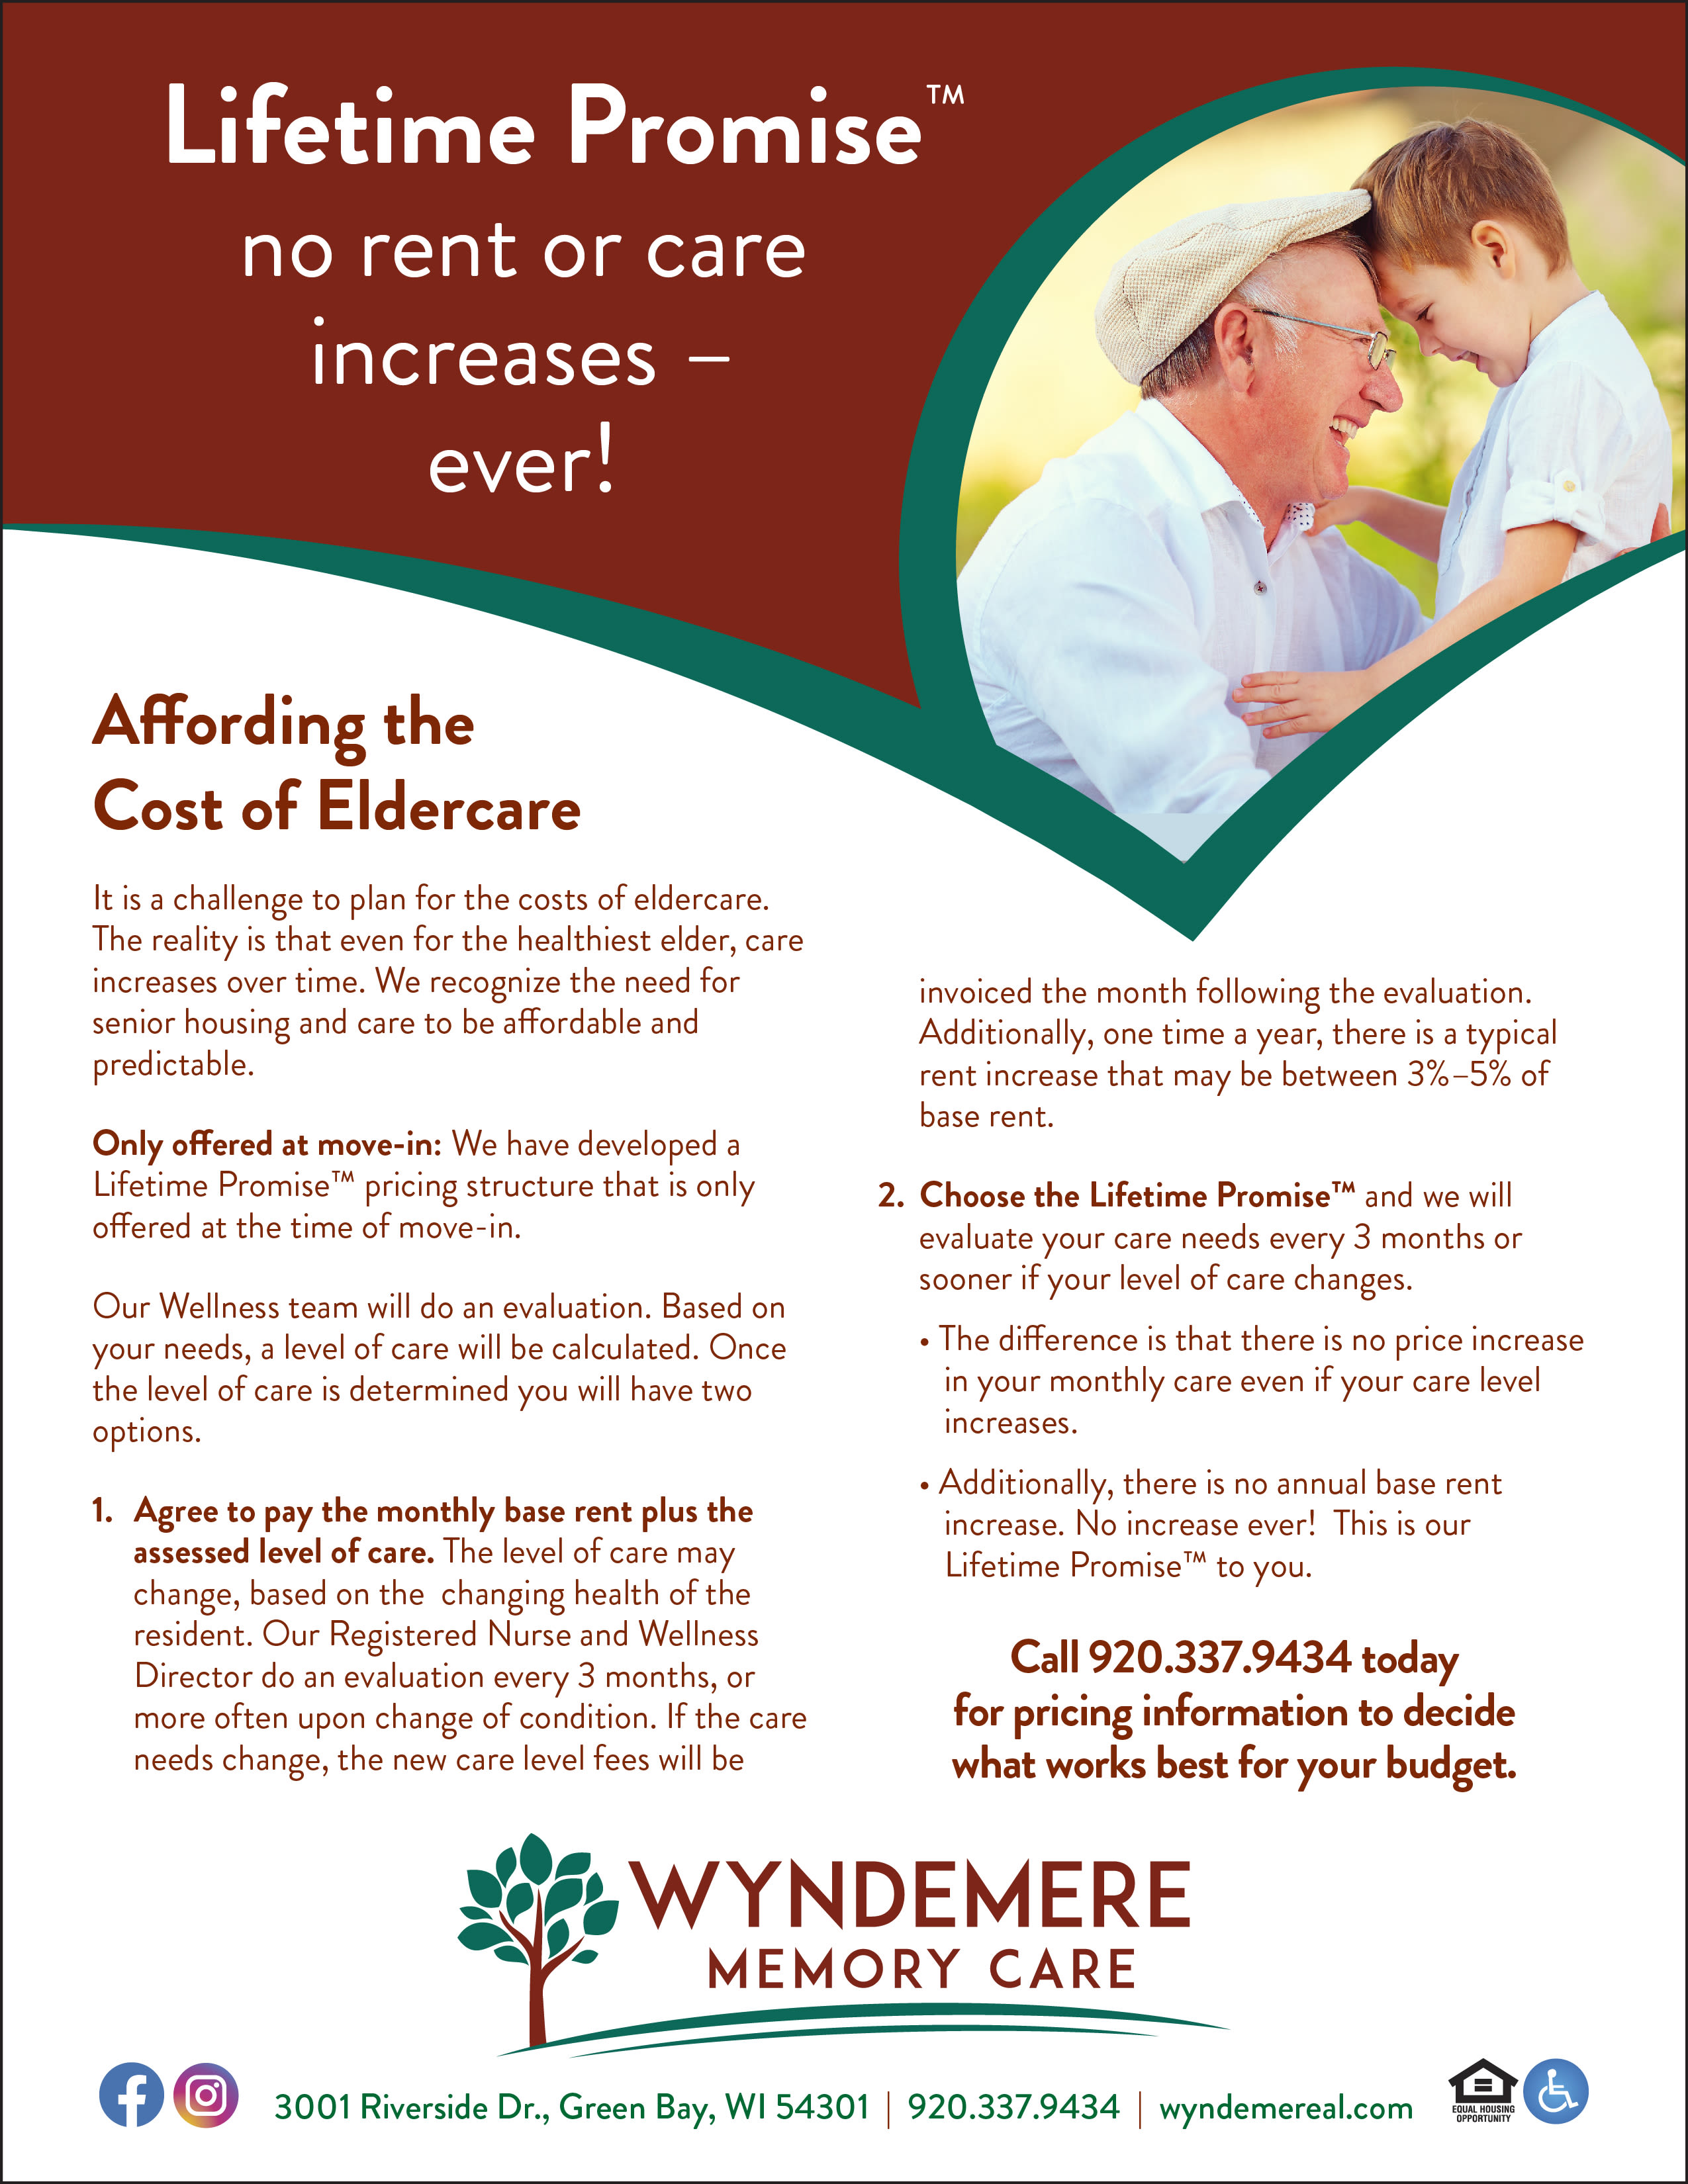 Lifetime promise flyer at Wyndemere Memory Care